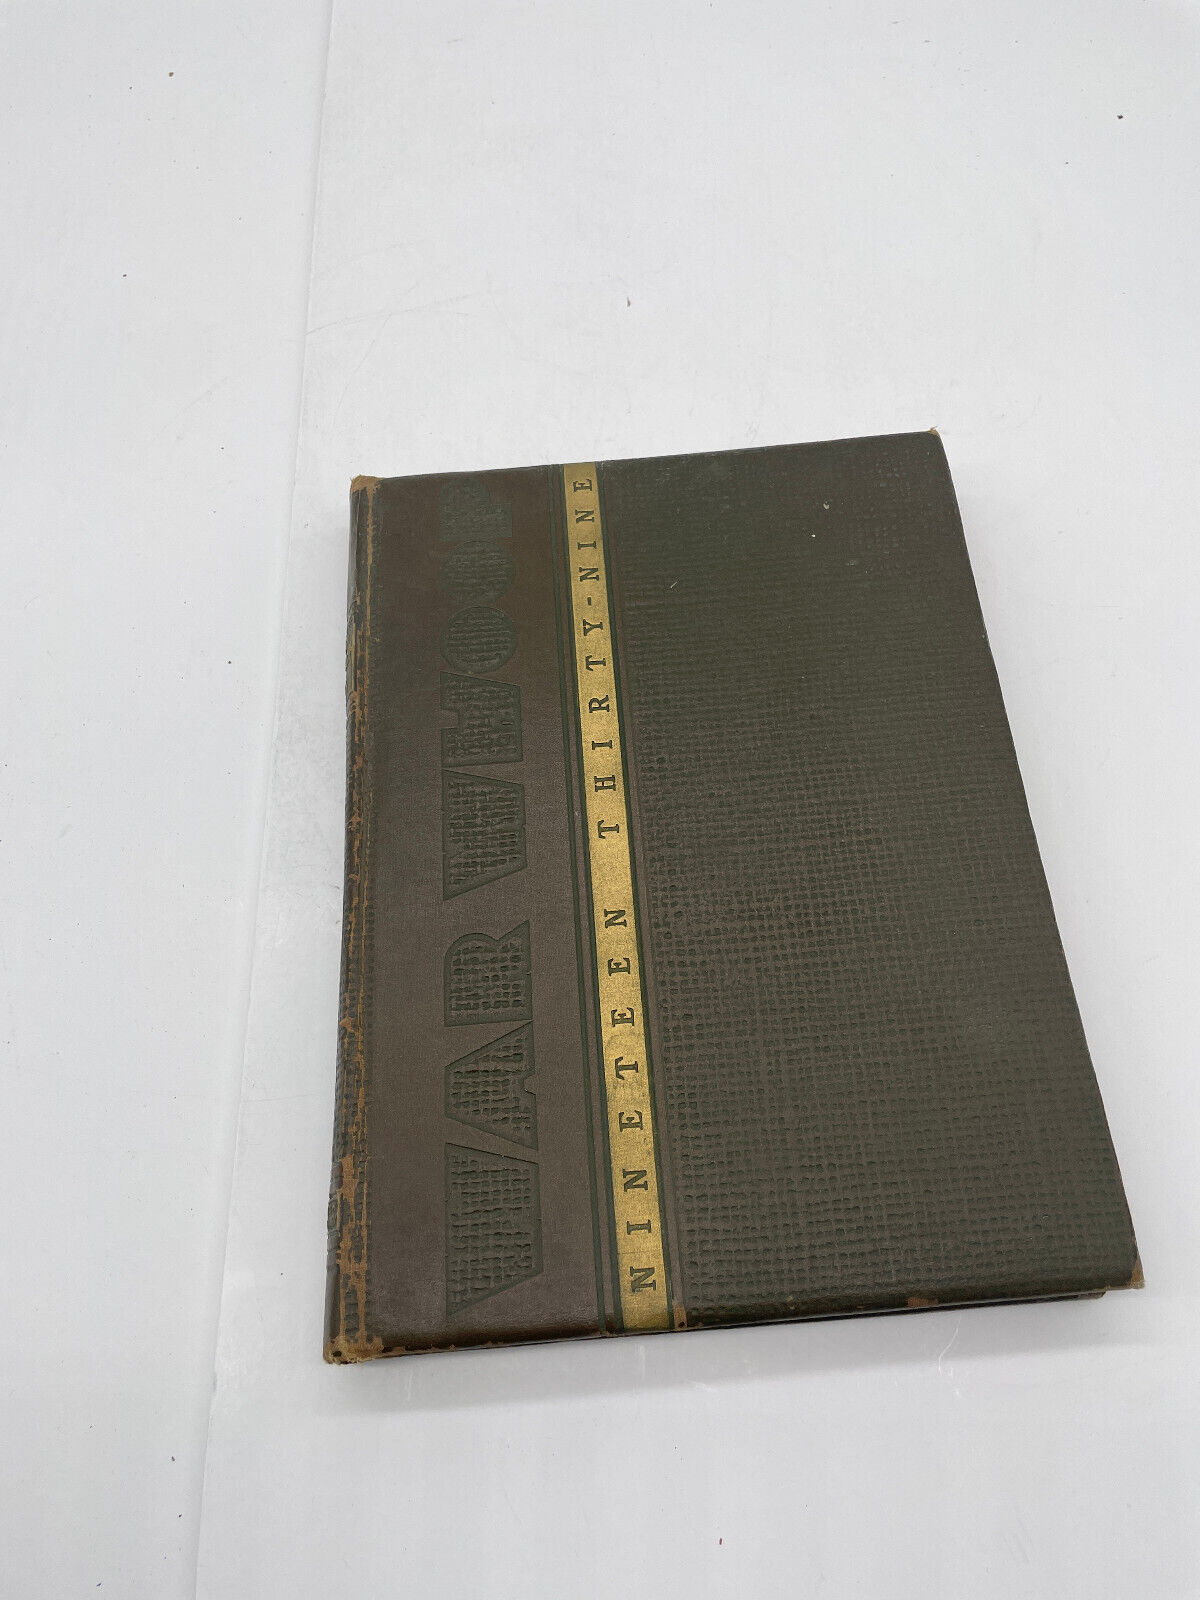 Norwich University WAR WHOOP Yearbook 1939 Norwich VT rare military rare book